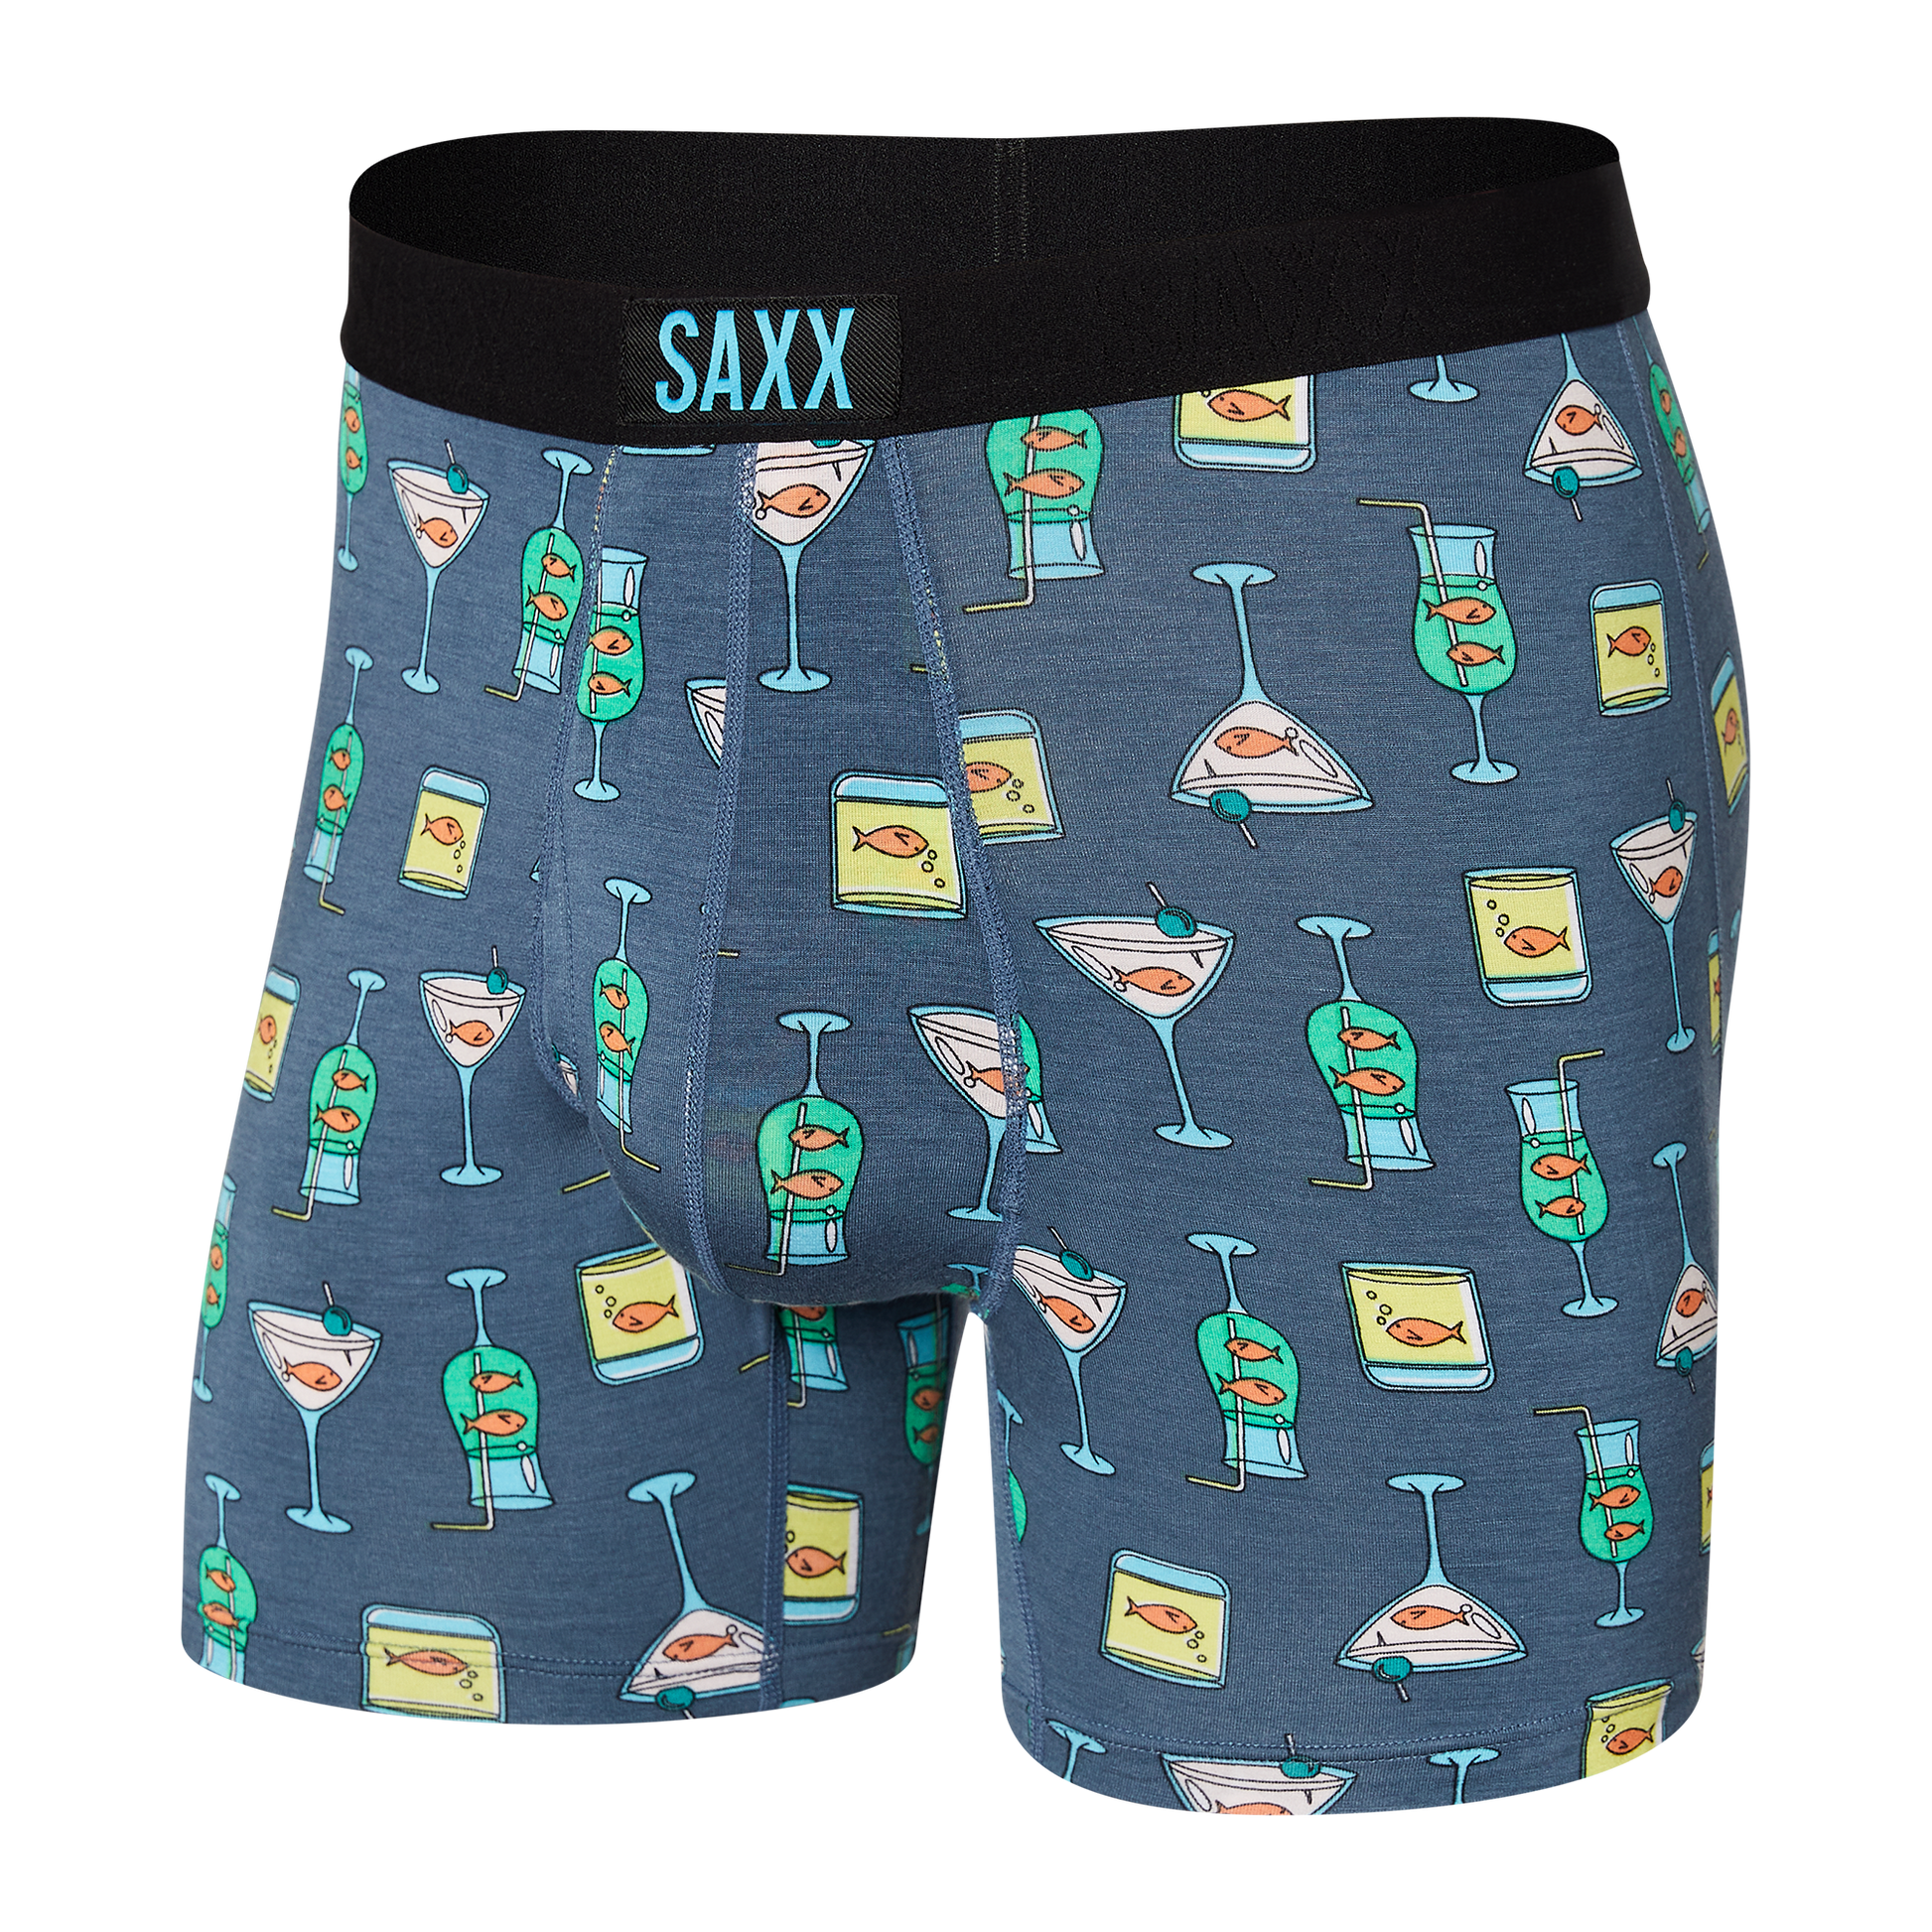 Ultra Boxer Brief (With Fly Opening) Underwear Saxx NAU S 